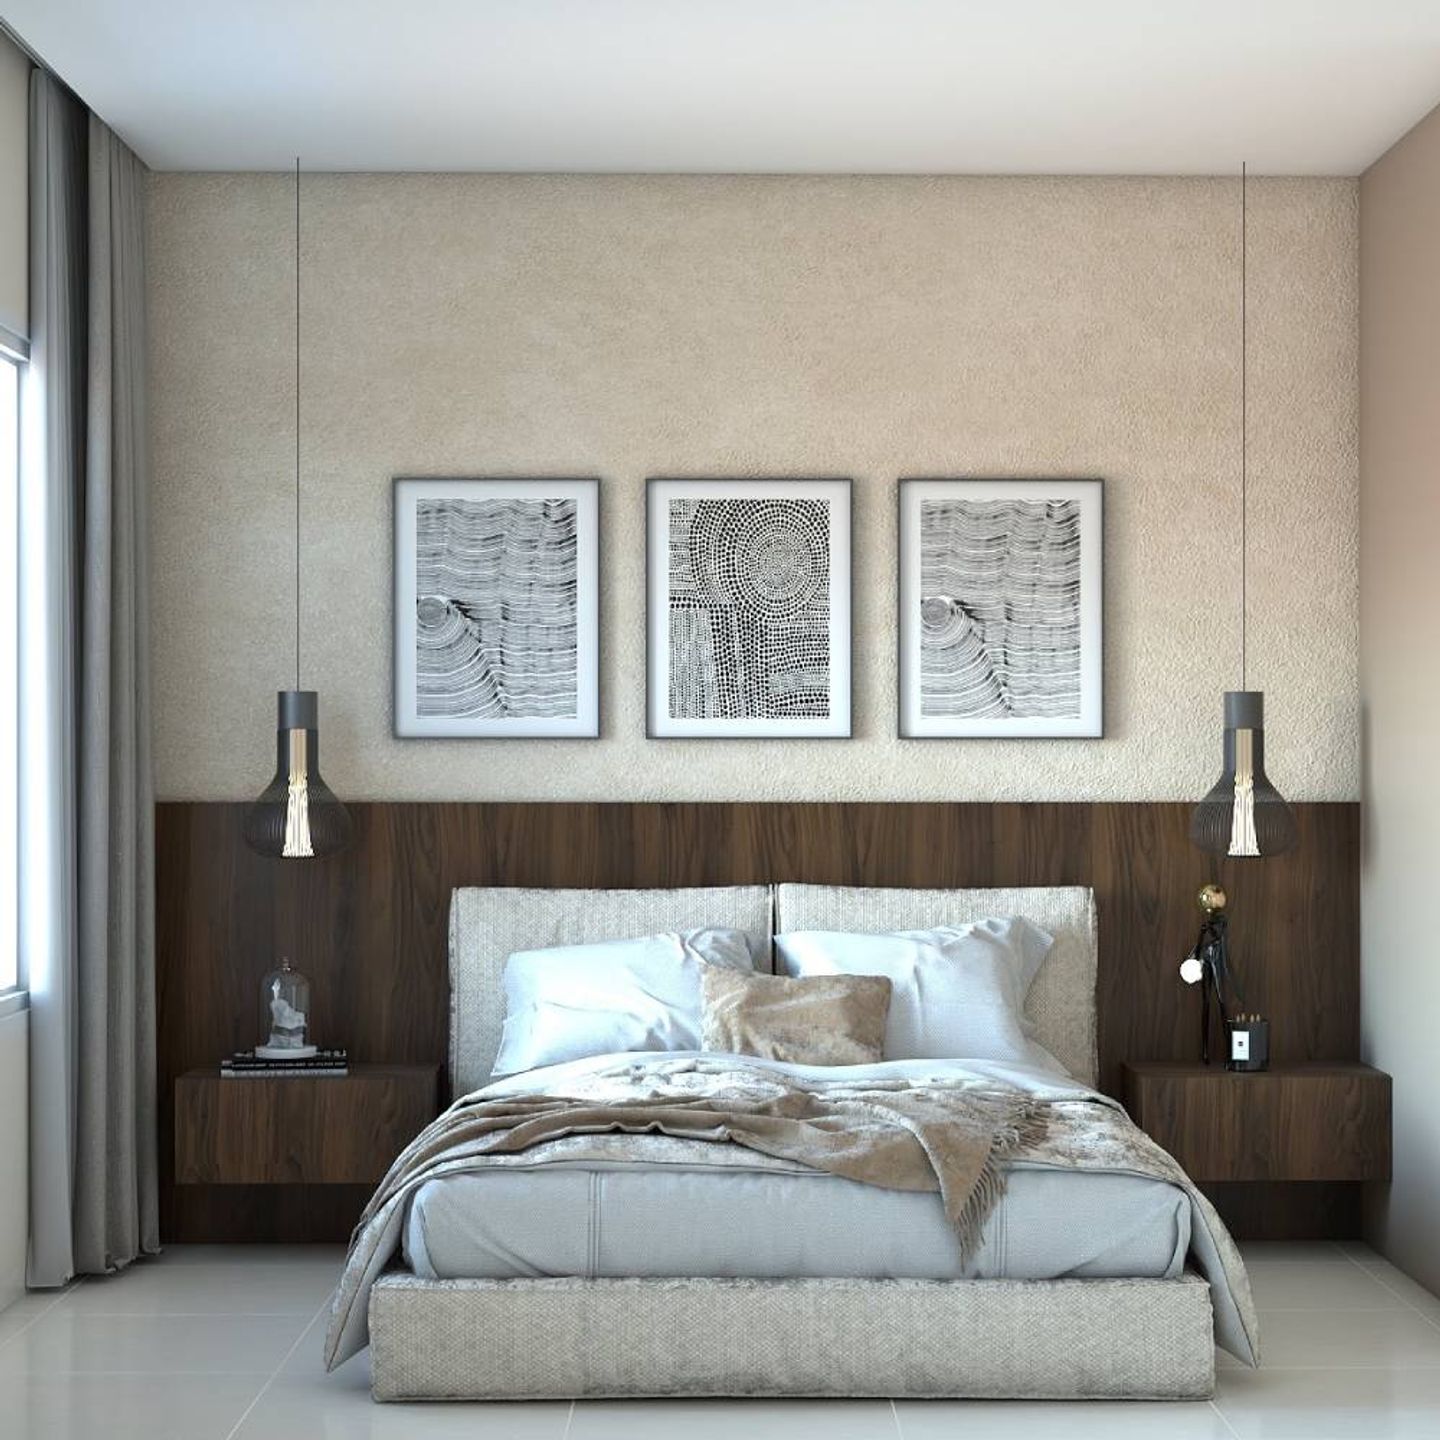 Beige And Brown Bedroom Wall Design With Paint And Wooden Panel - Livspace